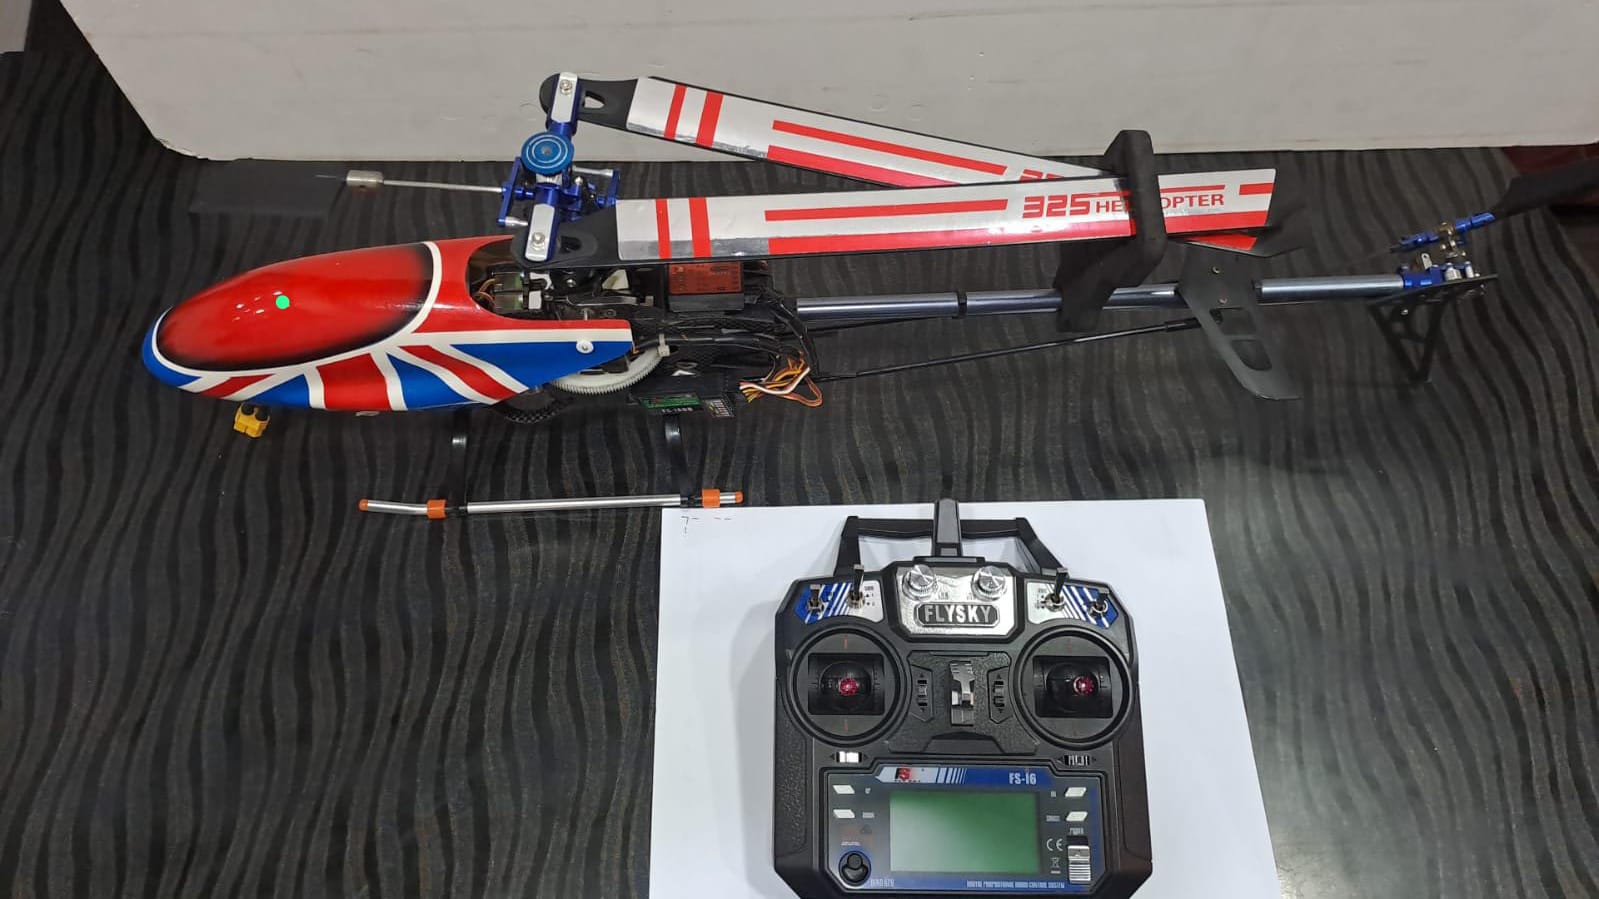 HILLER 450 RC HELICOPTER WITH BATTERY & REMOTE